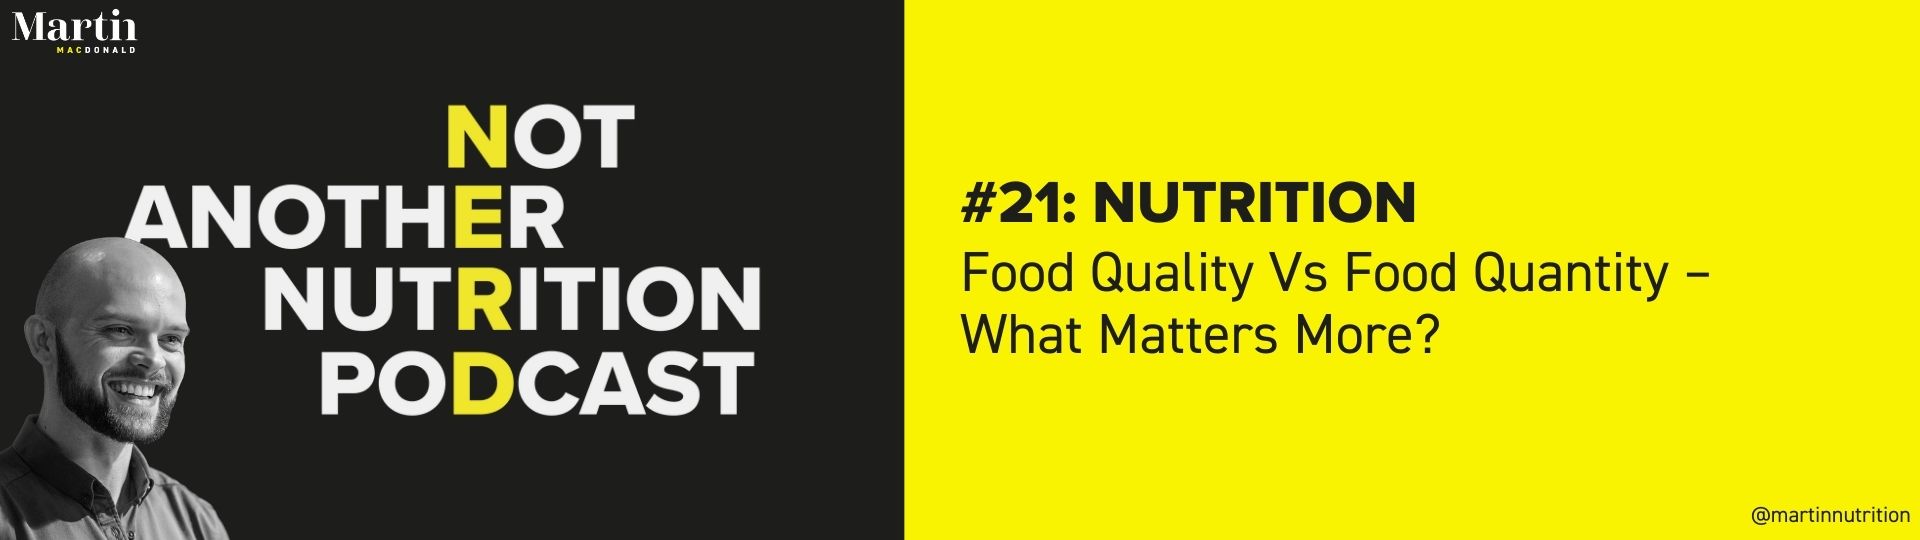 Food Quality Vs Food Quantity - What Matters More?